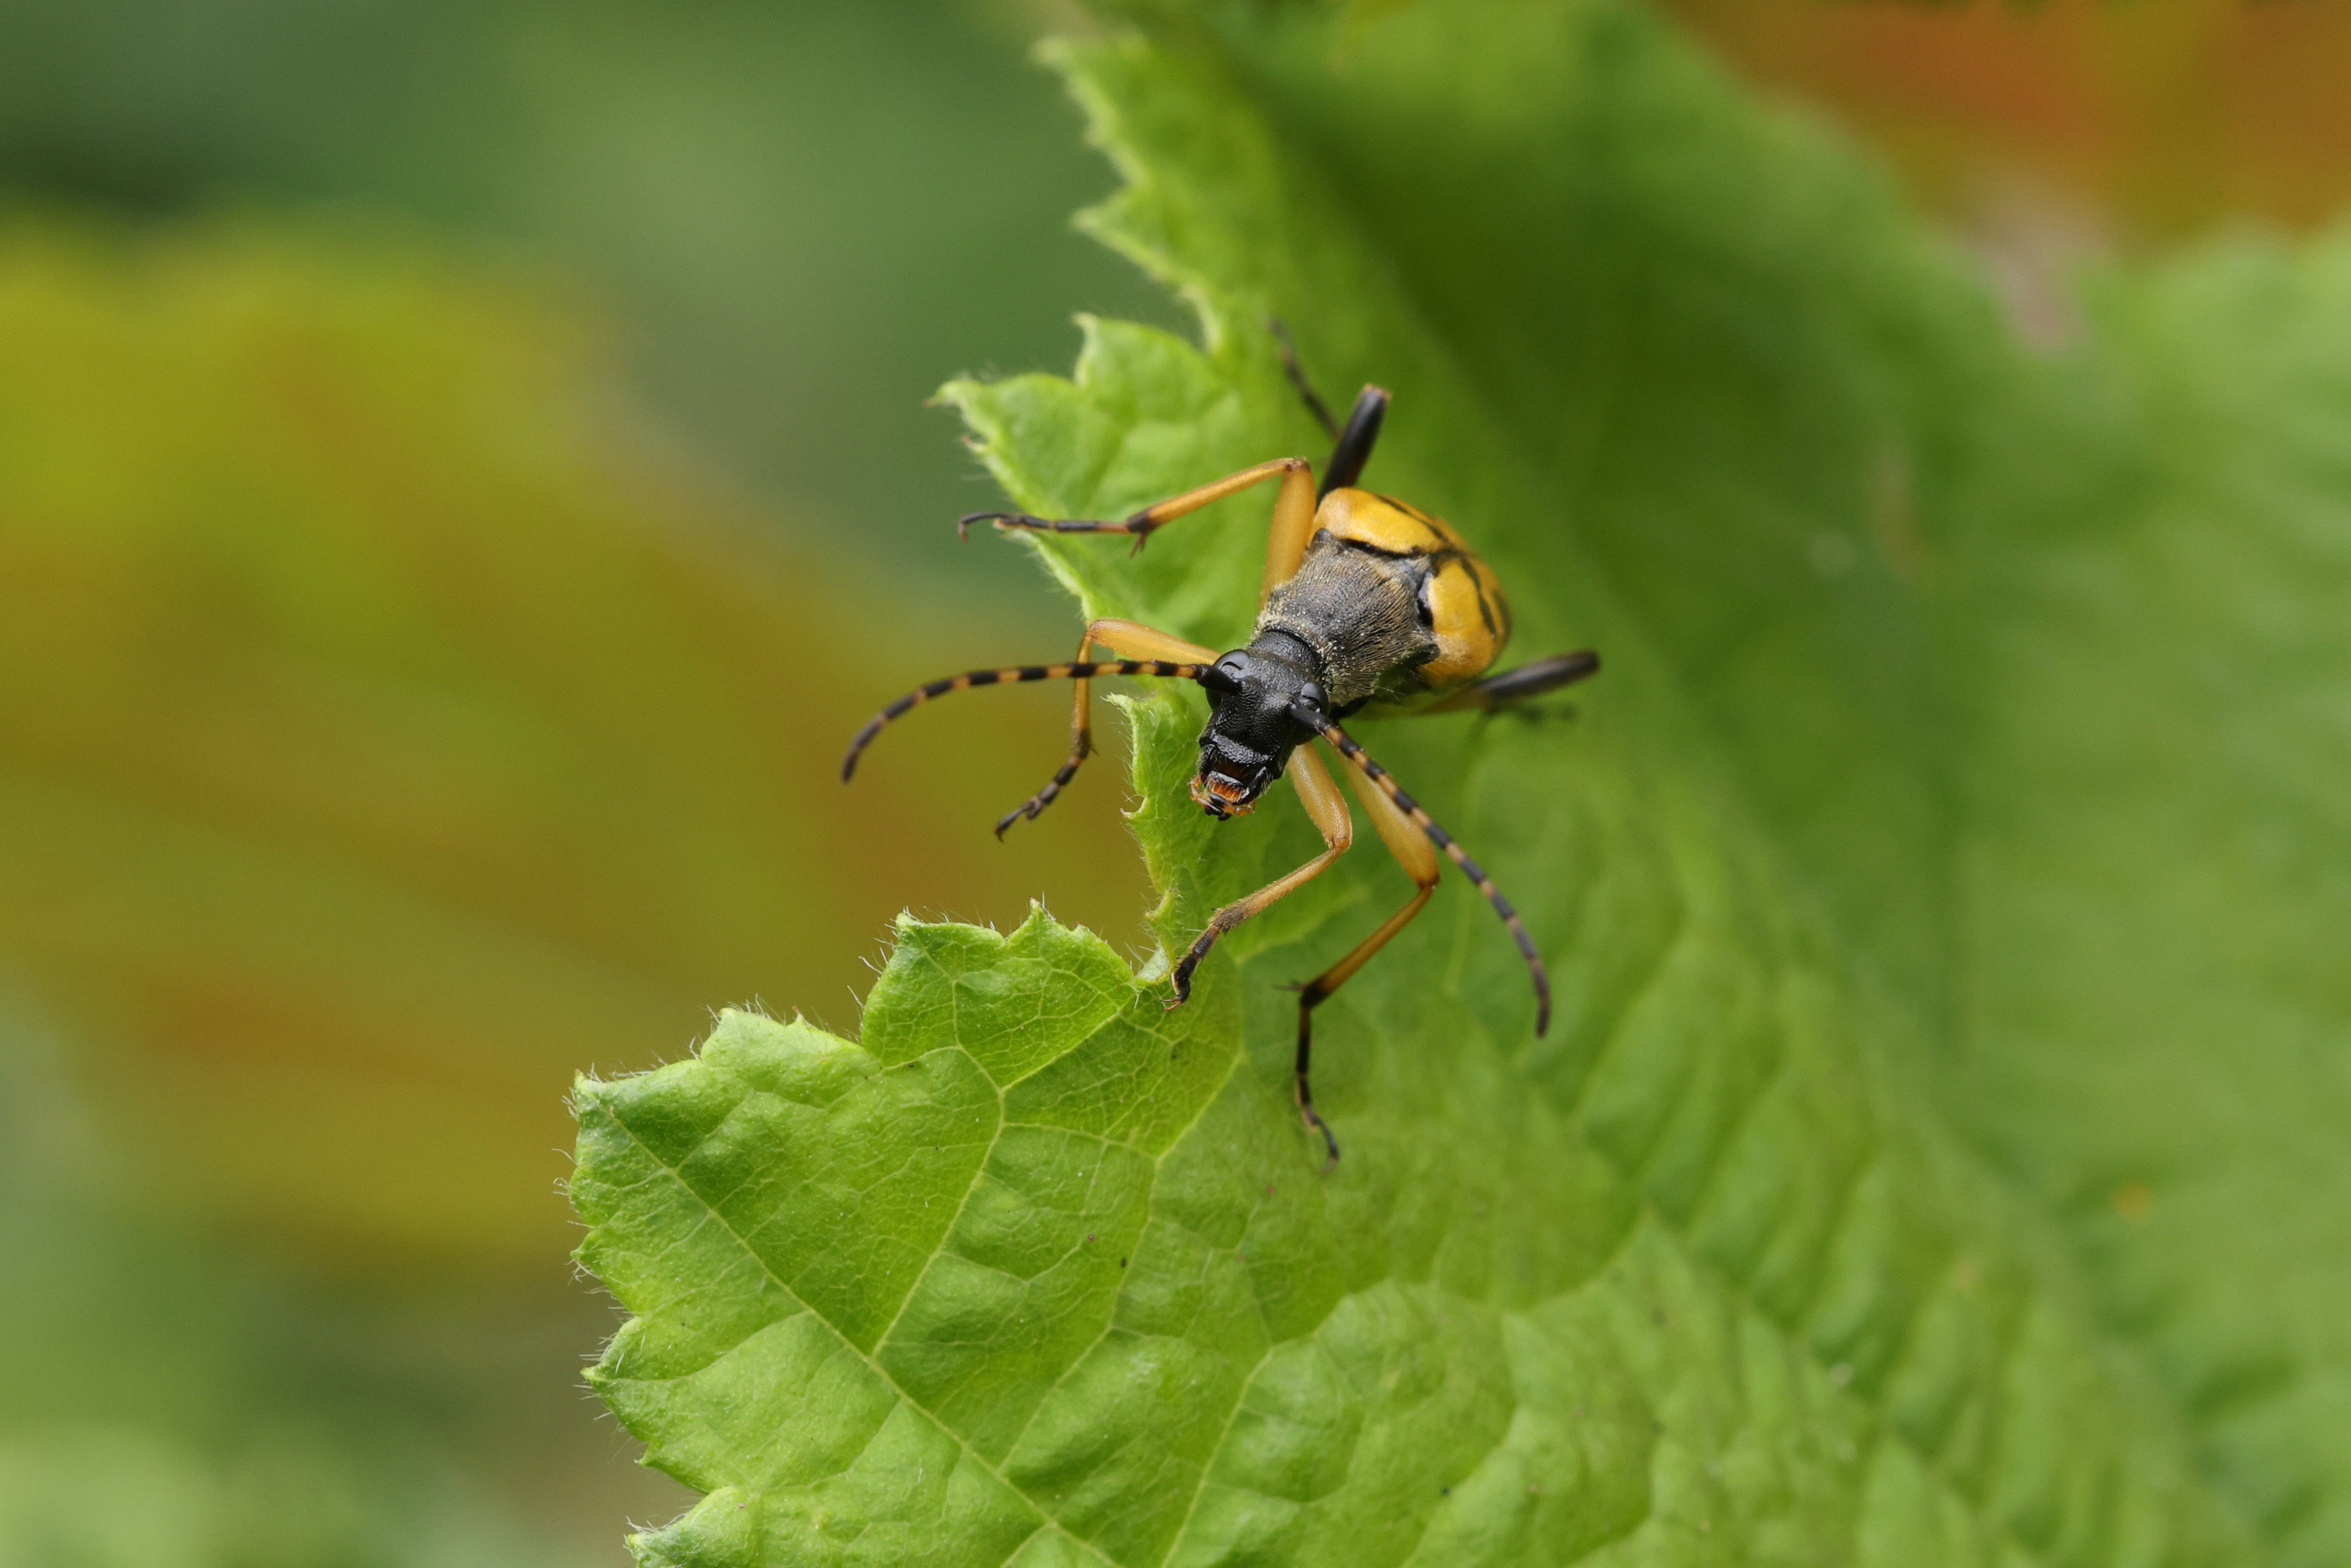 A Spotted Longhorn Beetle